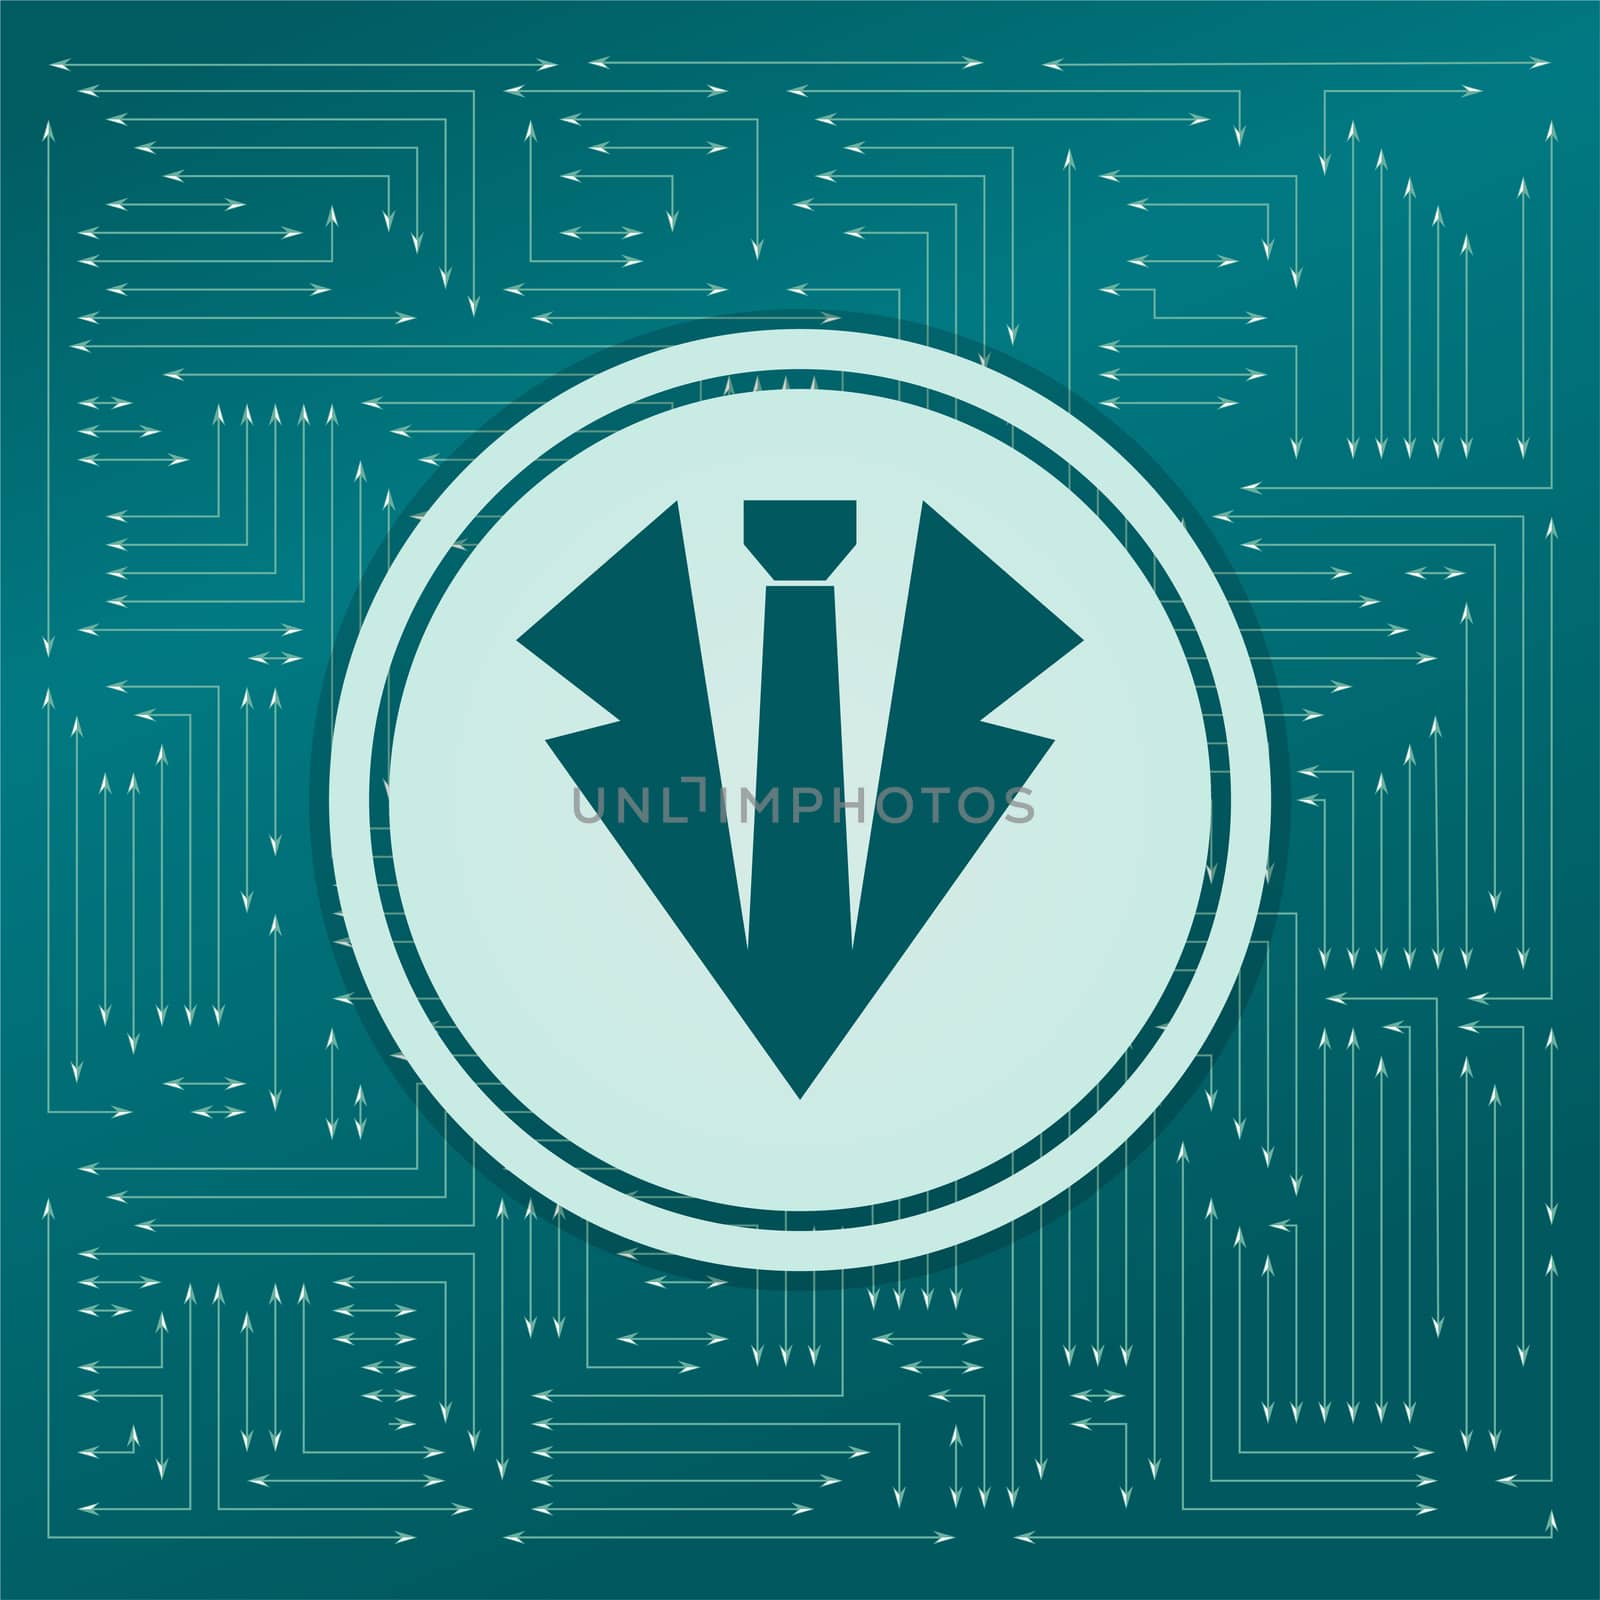 Necktie icon on a green background, with arrows in different directions. It appears on the electronic board. illustration